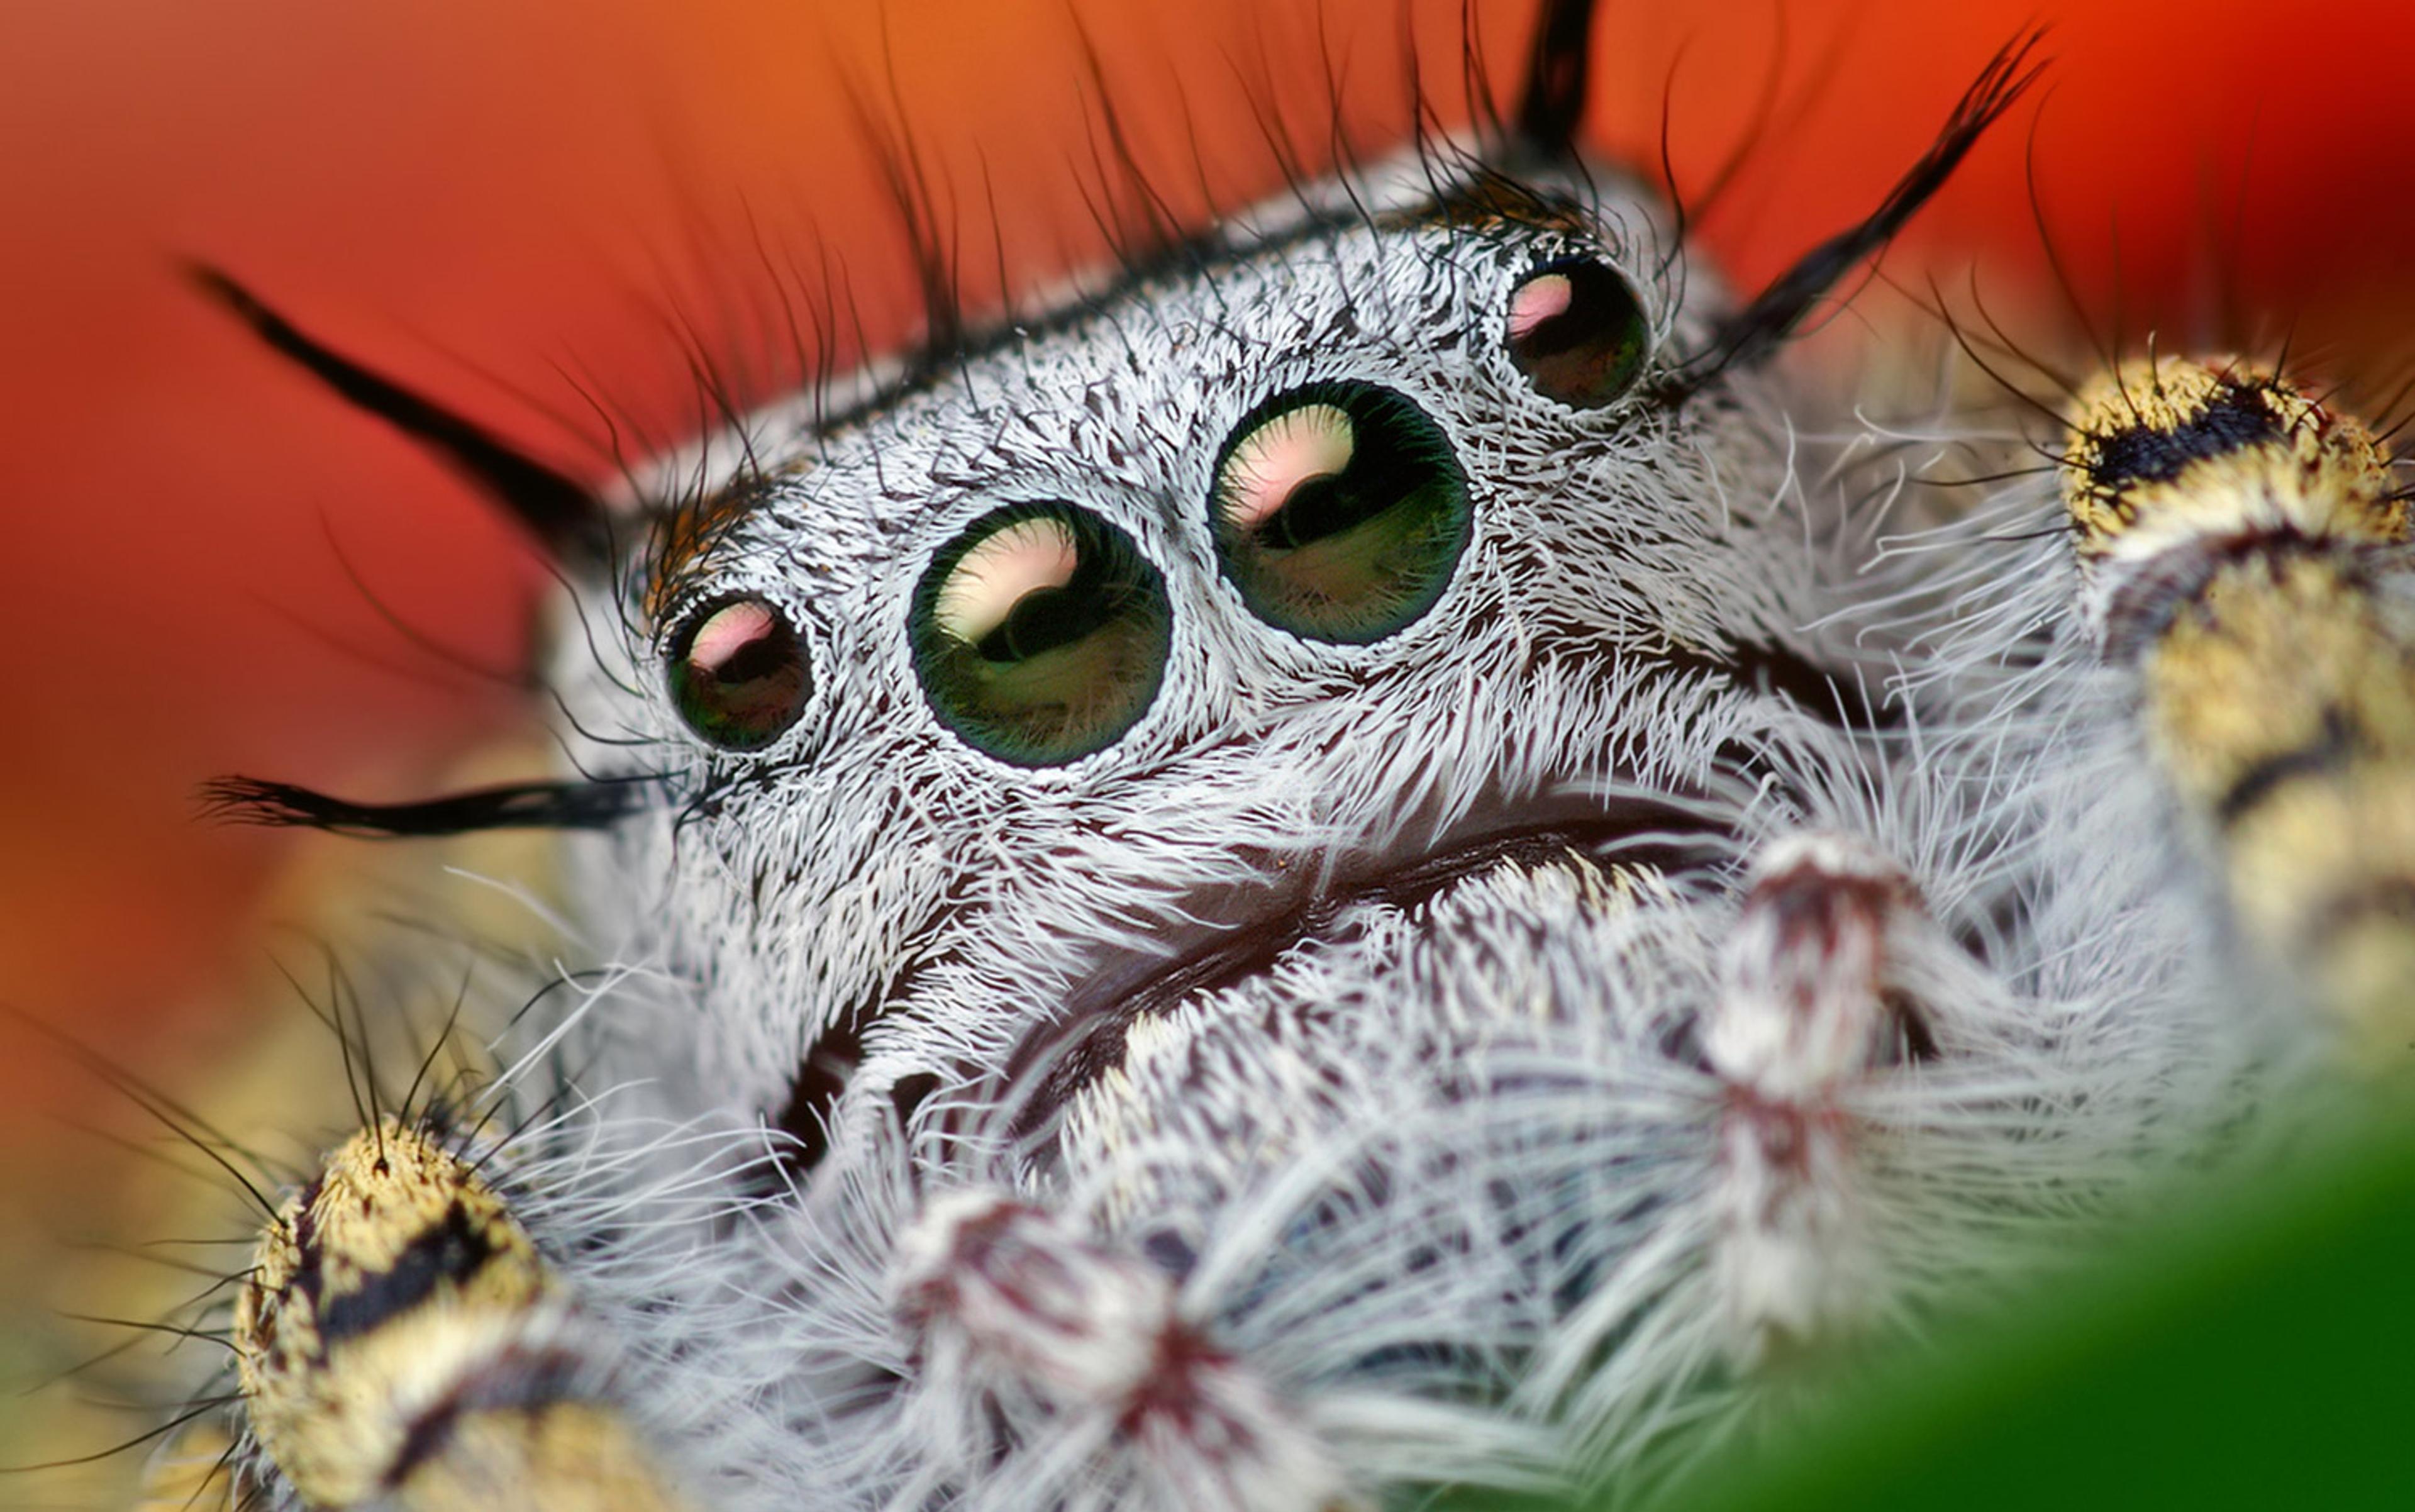 Scientists find a colorful jumping spider that is color blind •